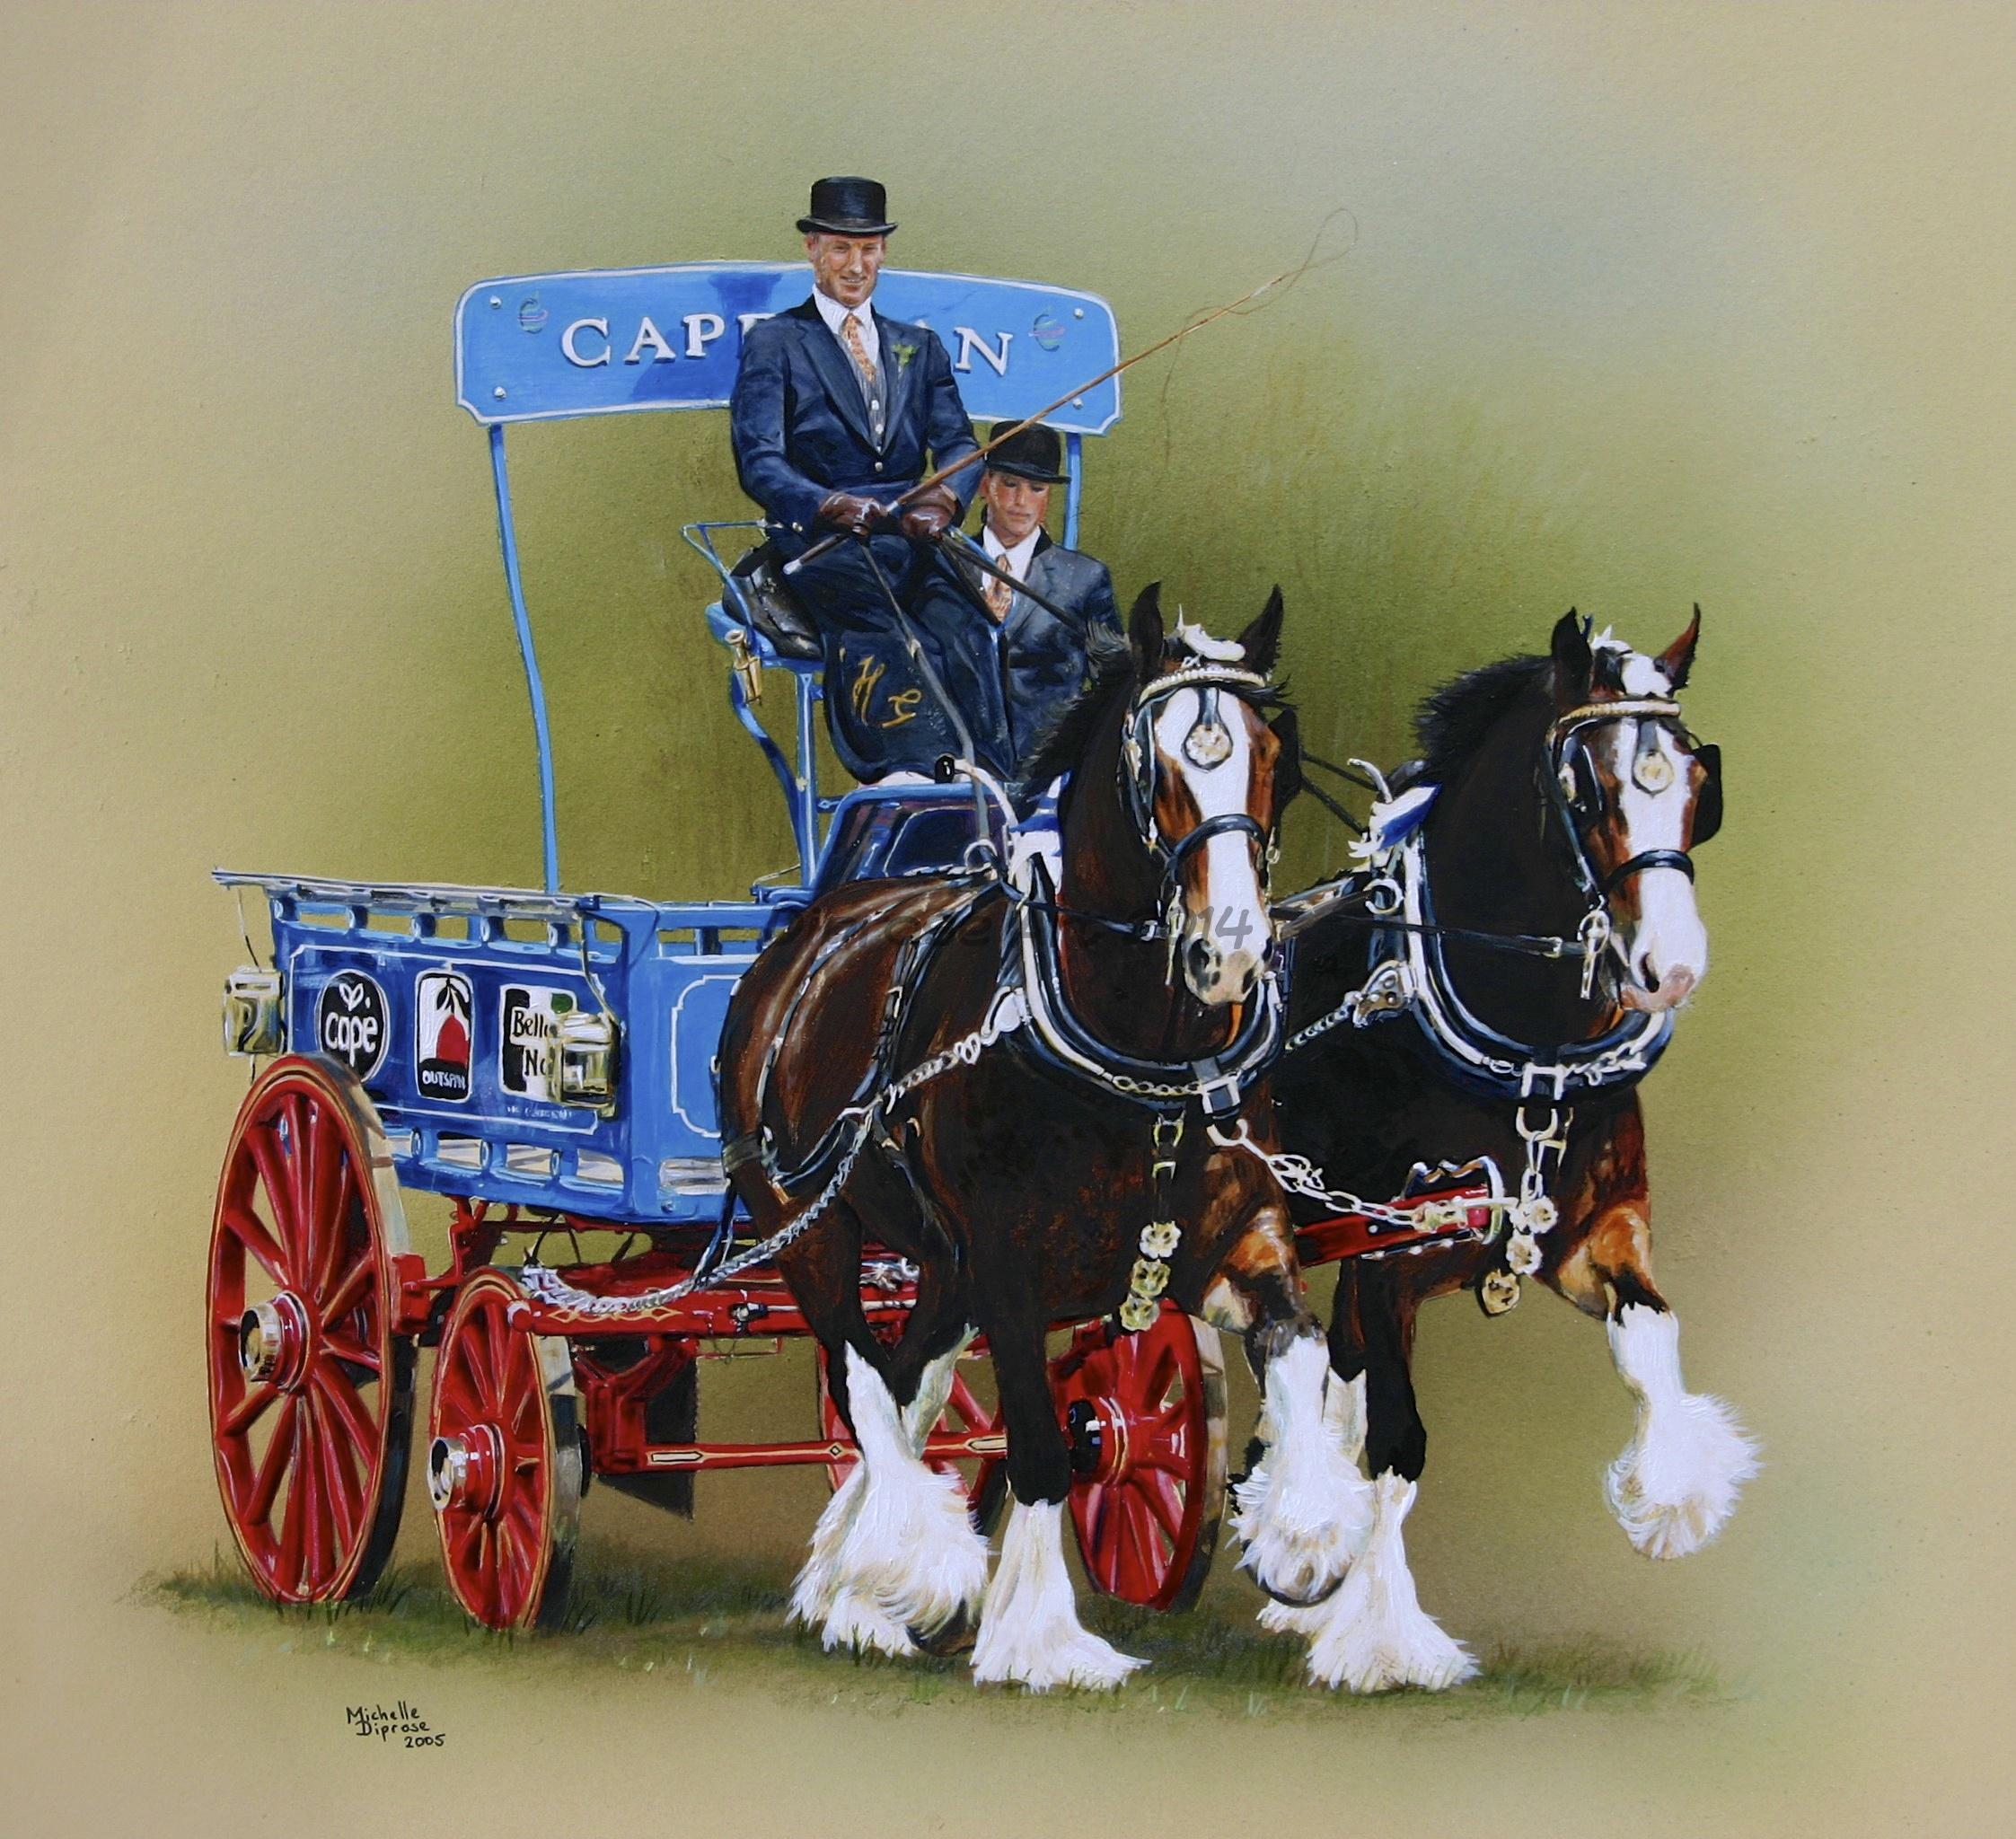 Acrylics on board - approx A3 - horse portraits - Jim and Sport are two fantastic Shire horses and this is them with their owner John.  This clever team have won many times and been on TV more than once - awesome.  (But difficult to paint!)